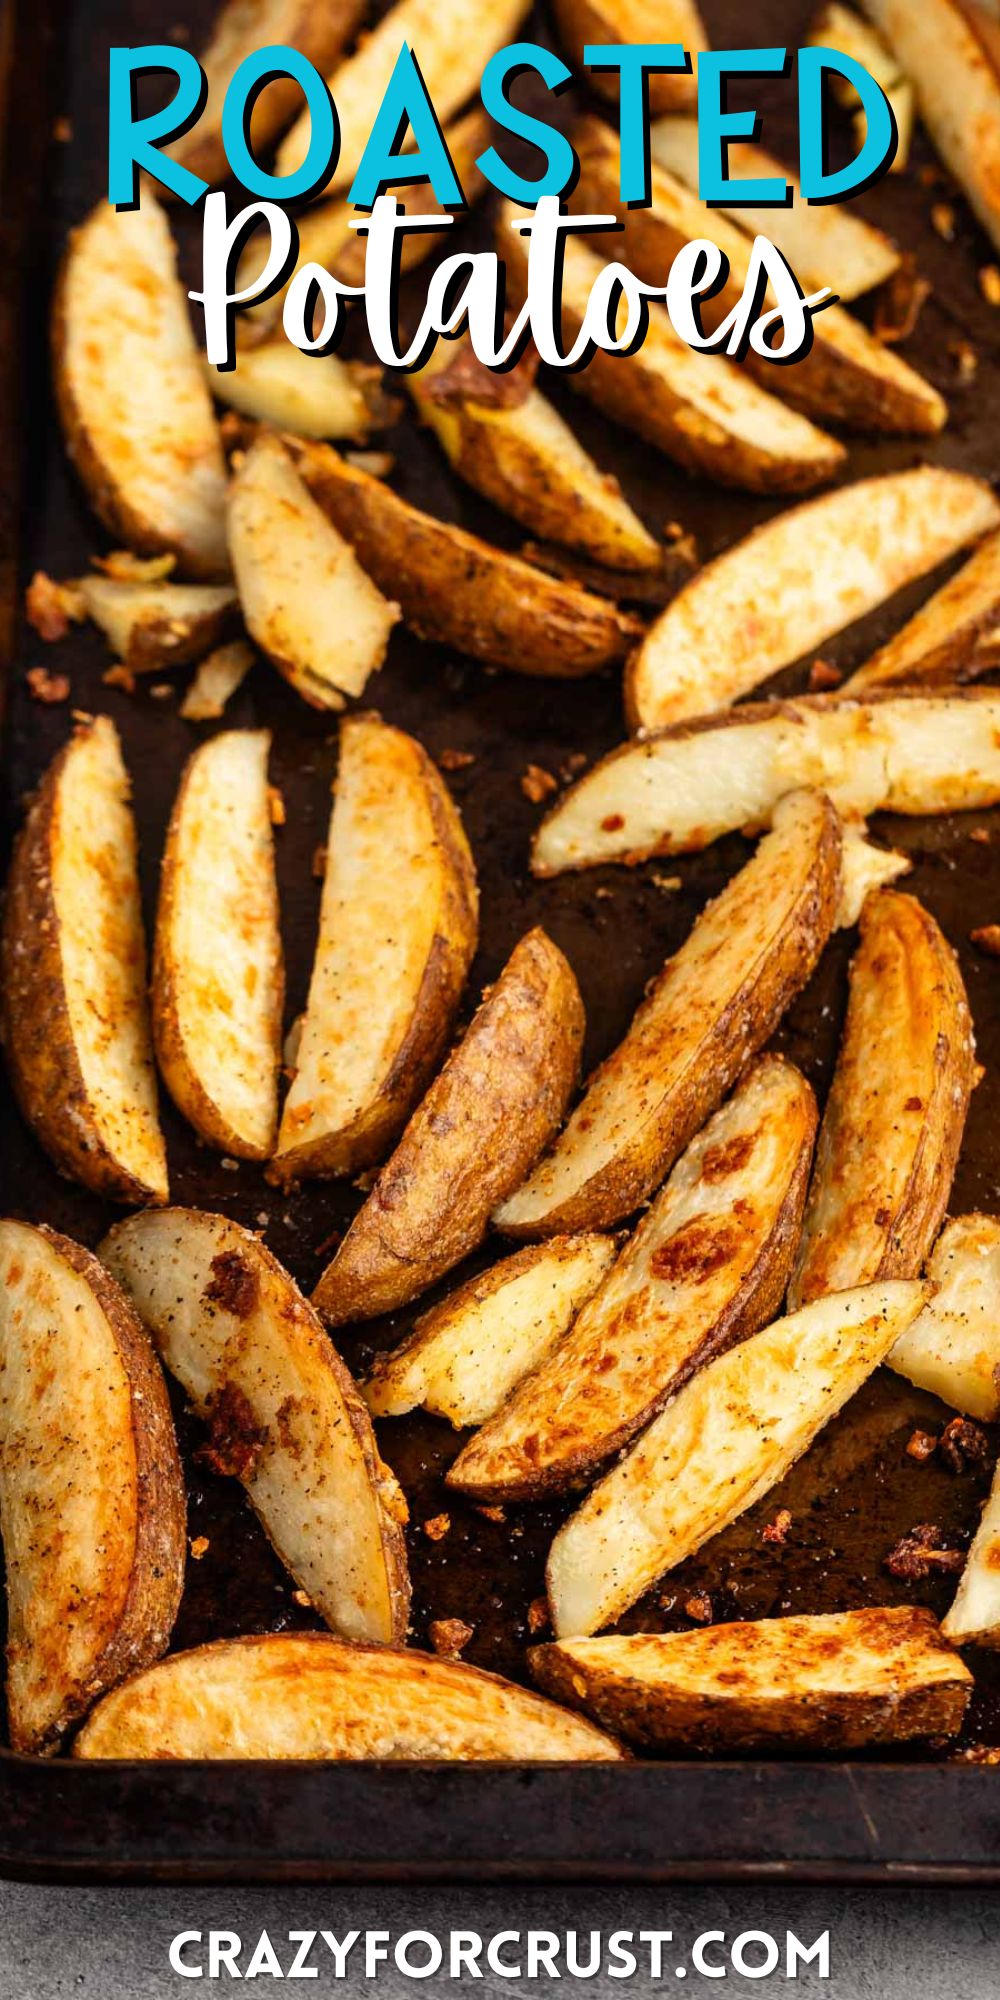 potato wedges on a brown baking sheet with words on the image.